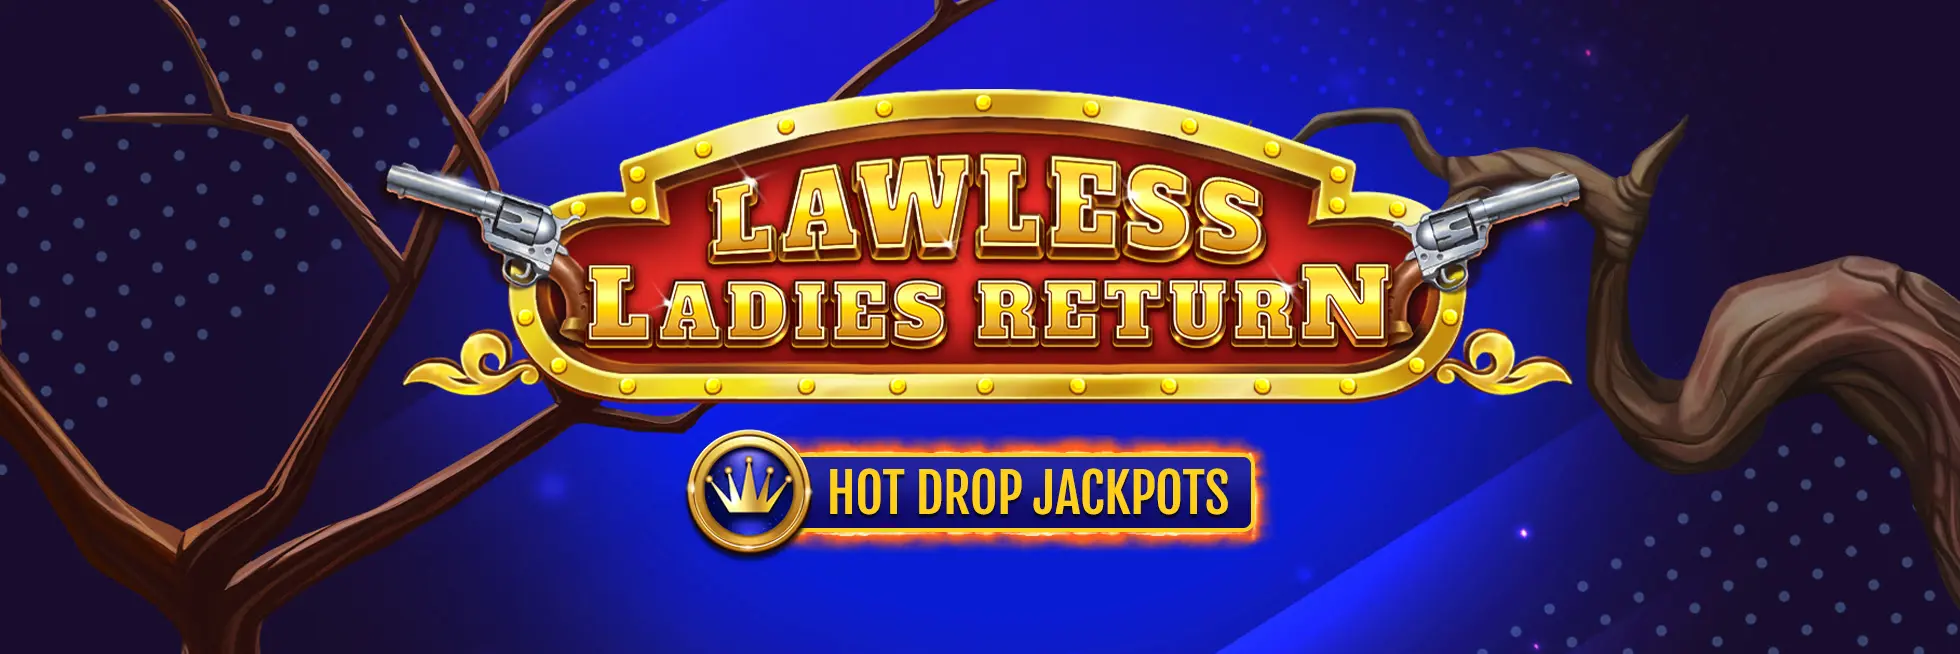 Discover a world of Wild West wonders in Lawless Ladies Return at Café Casino, where Random Wilds, Free Spins, and Hot Drop Jackpots pave the way to riches.